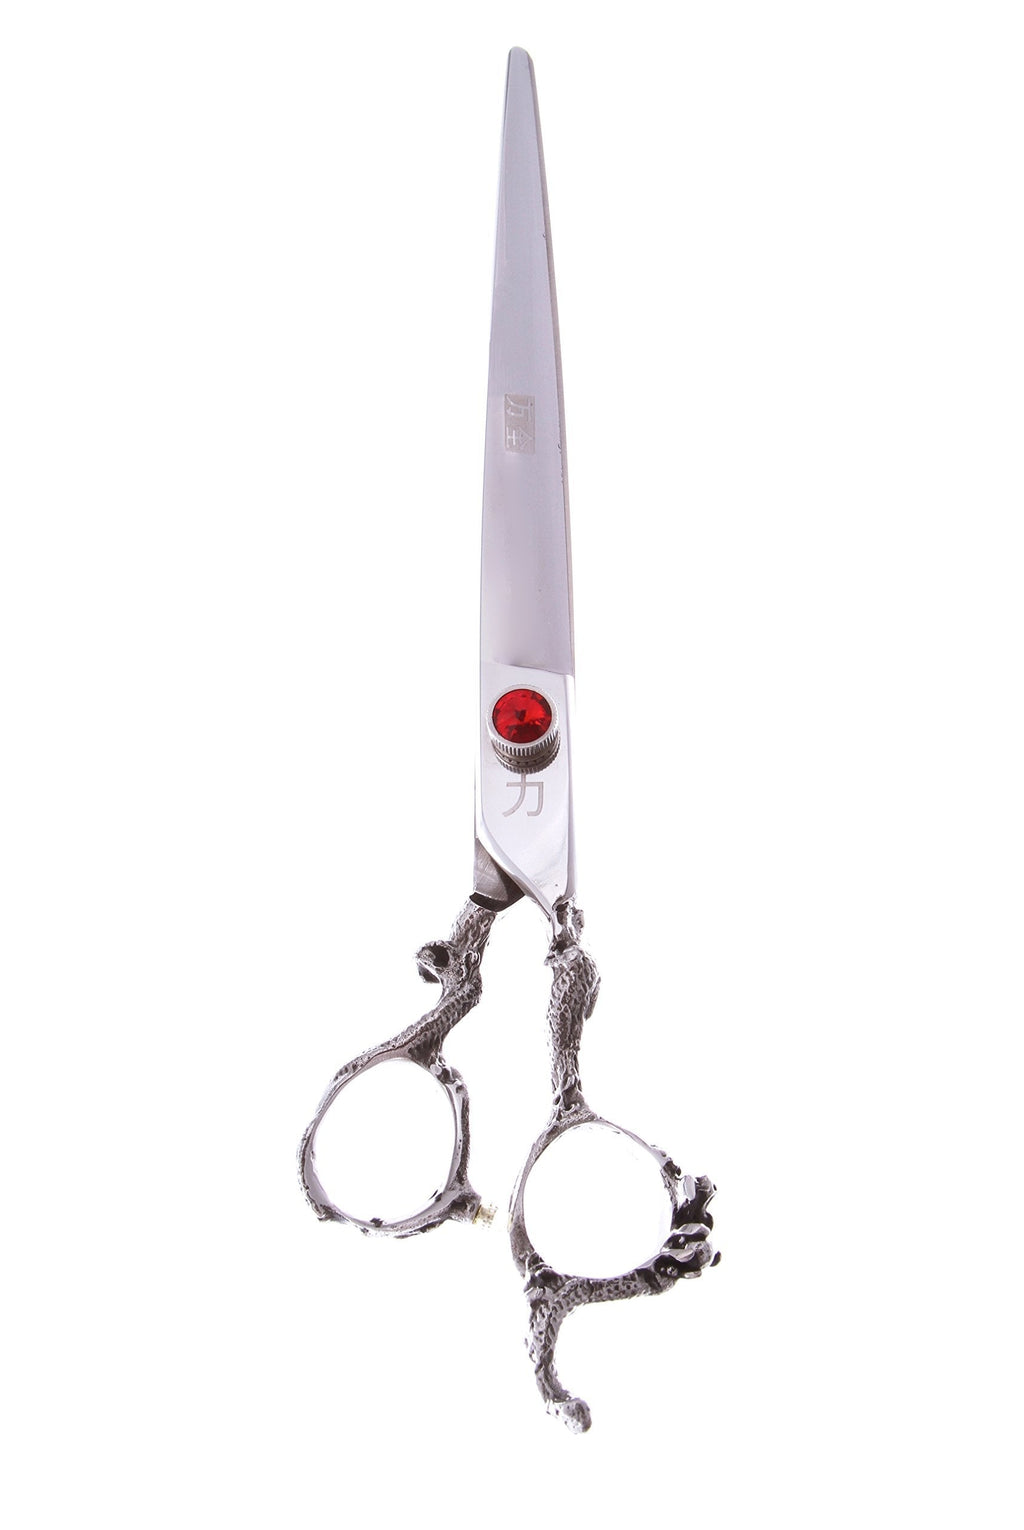 [Australia] - ShearsDirect Japanese 440C Stainless Steel Curved Shear with Dragon Handle, 9.0" 